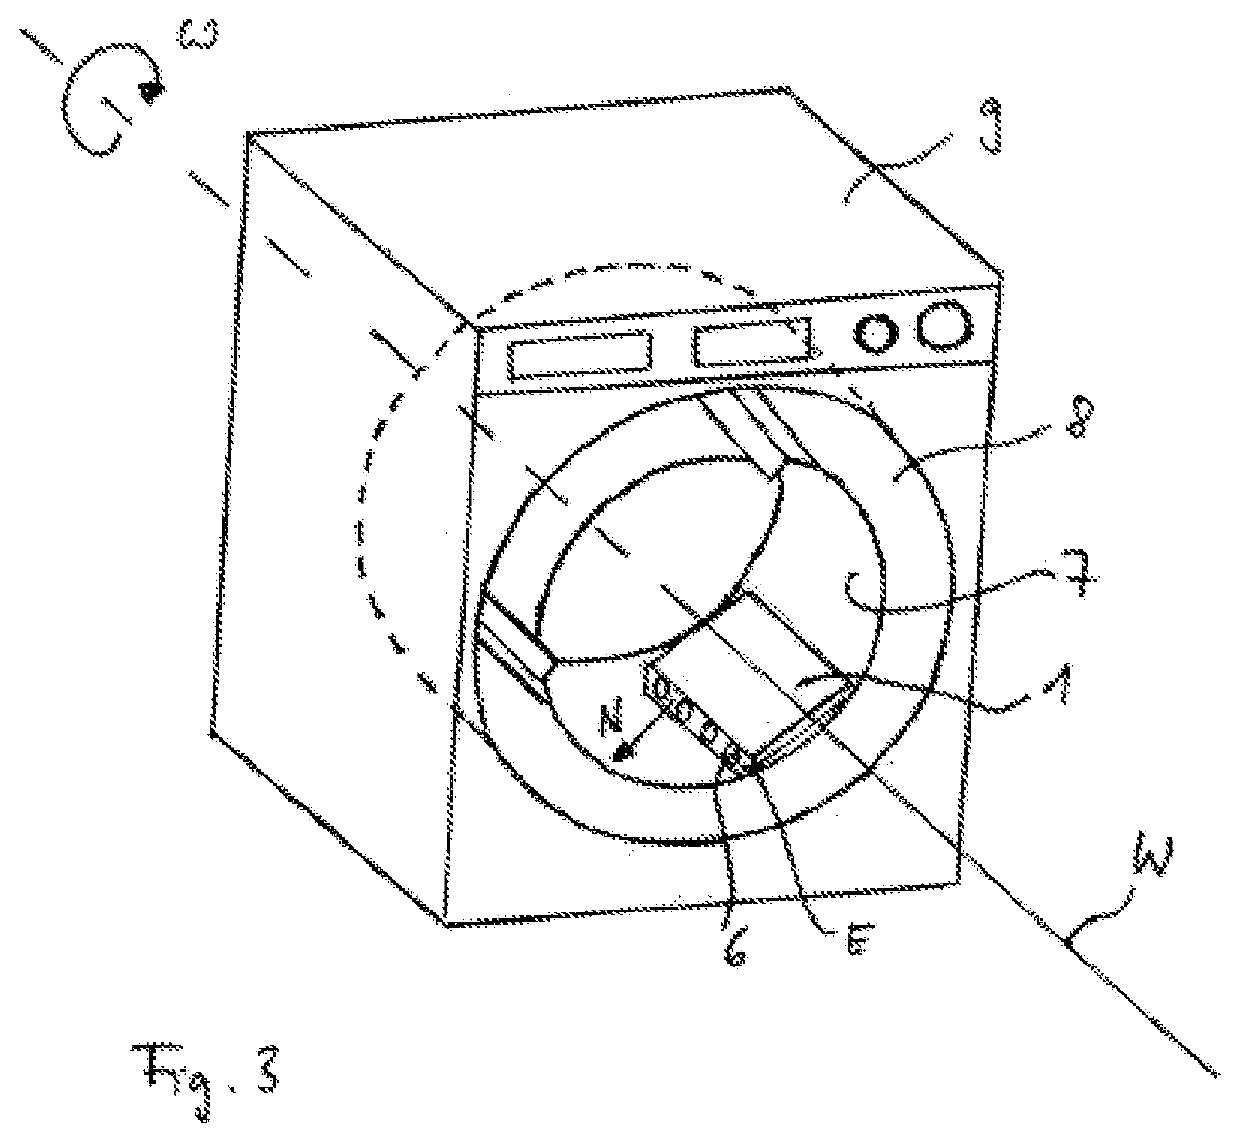 Device for installation on an inner circumferential surface of a washing machine drum